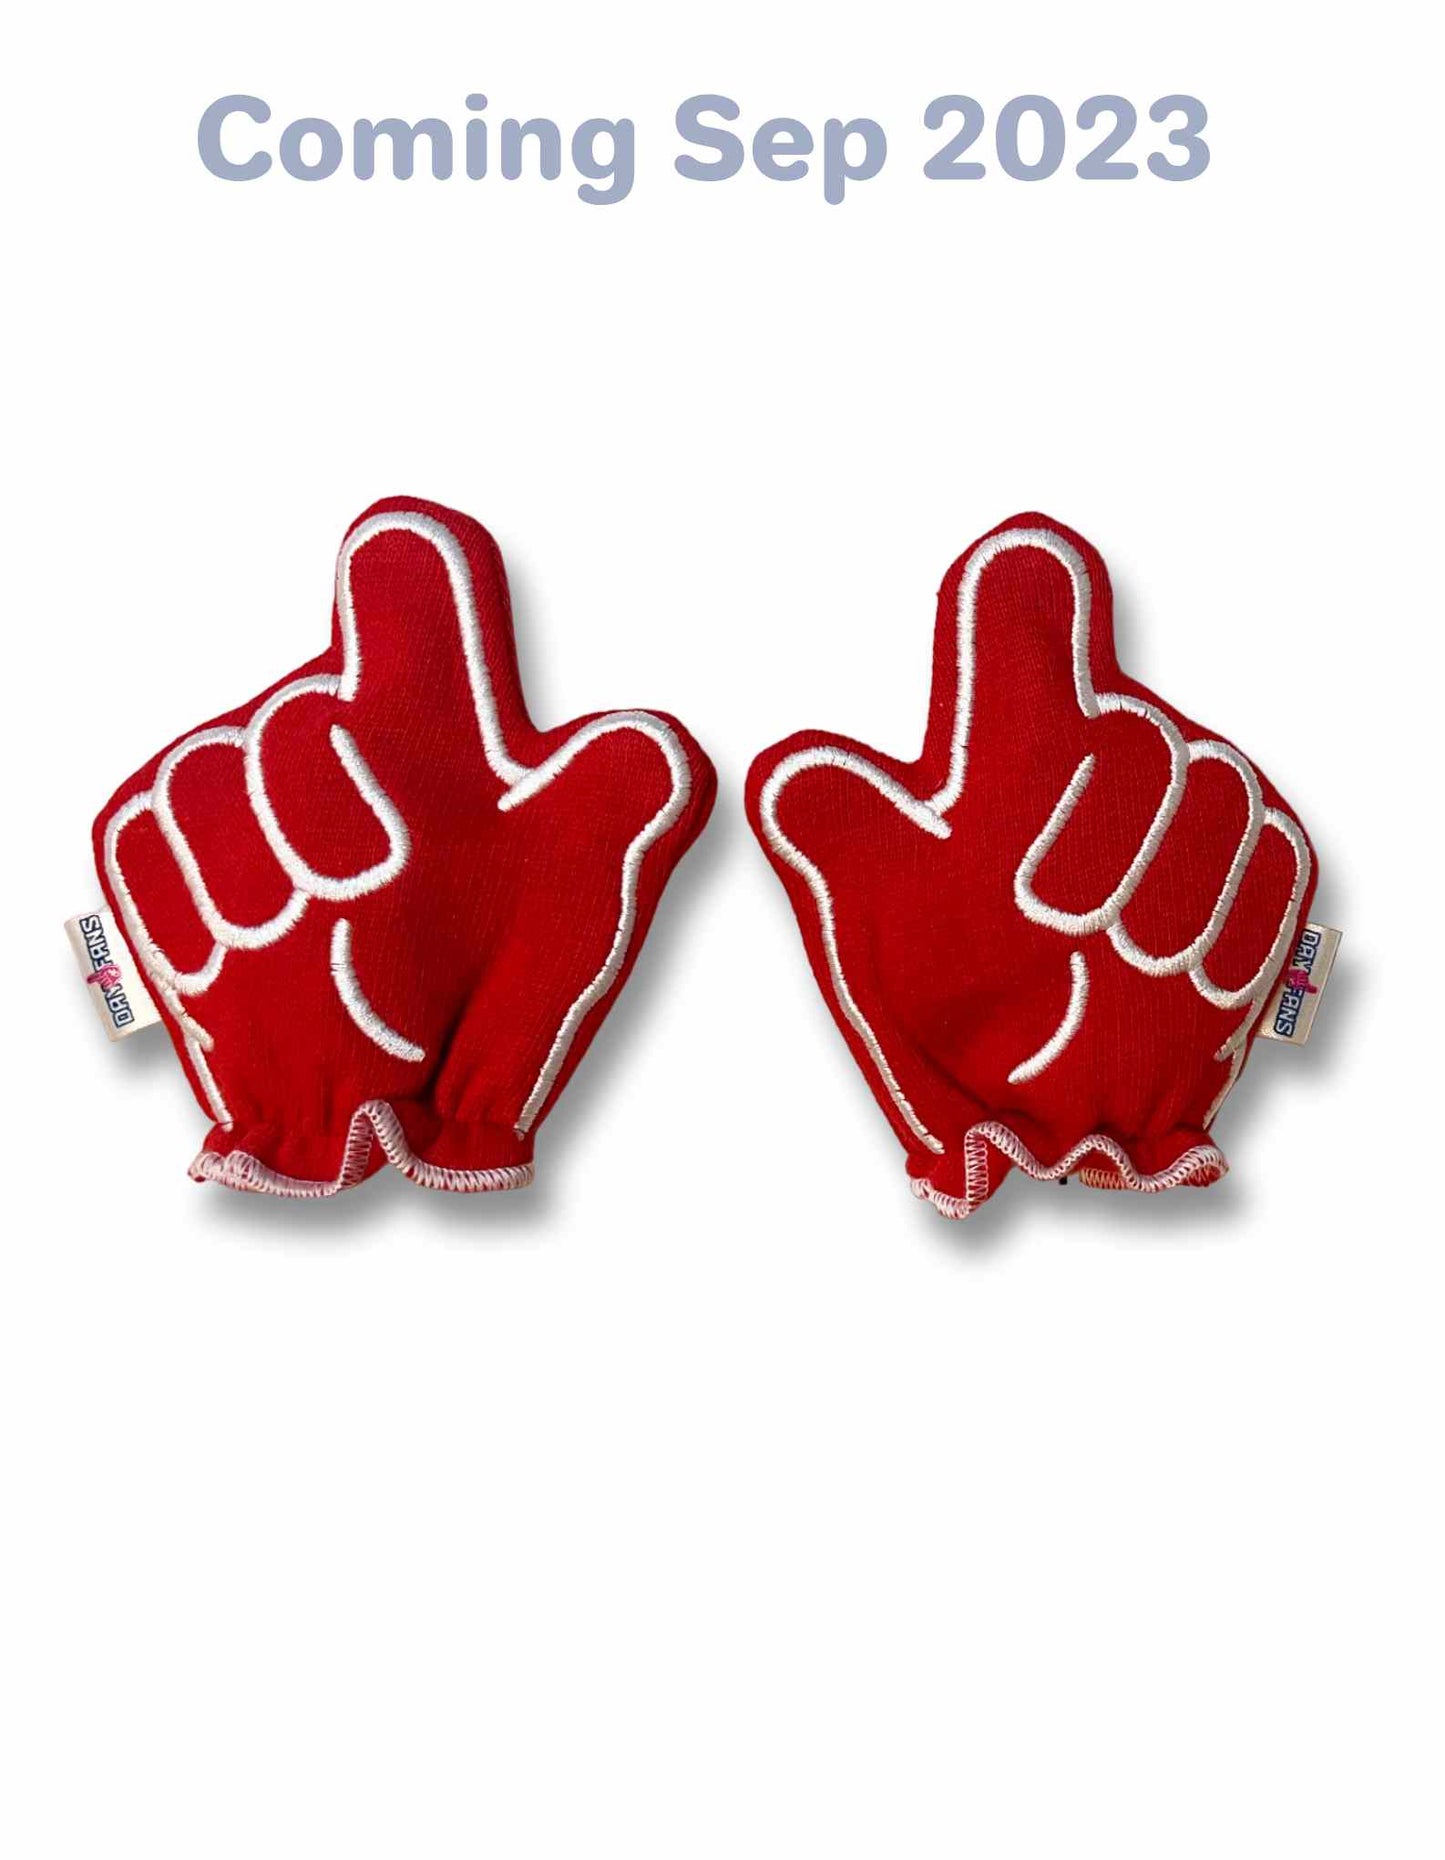 Wisconsin On Wisconsin! FanMitts™